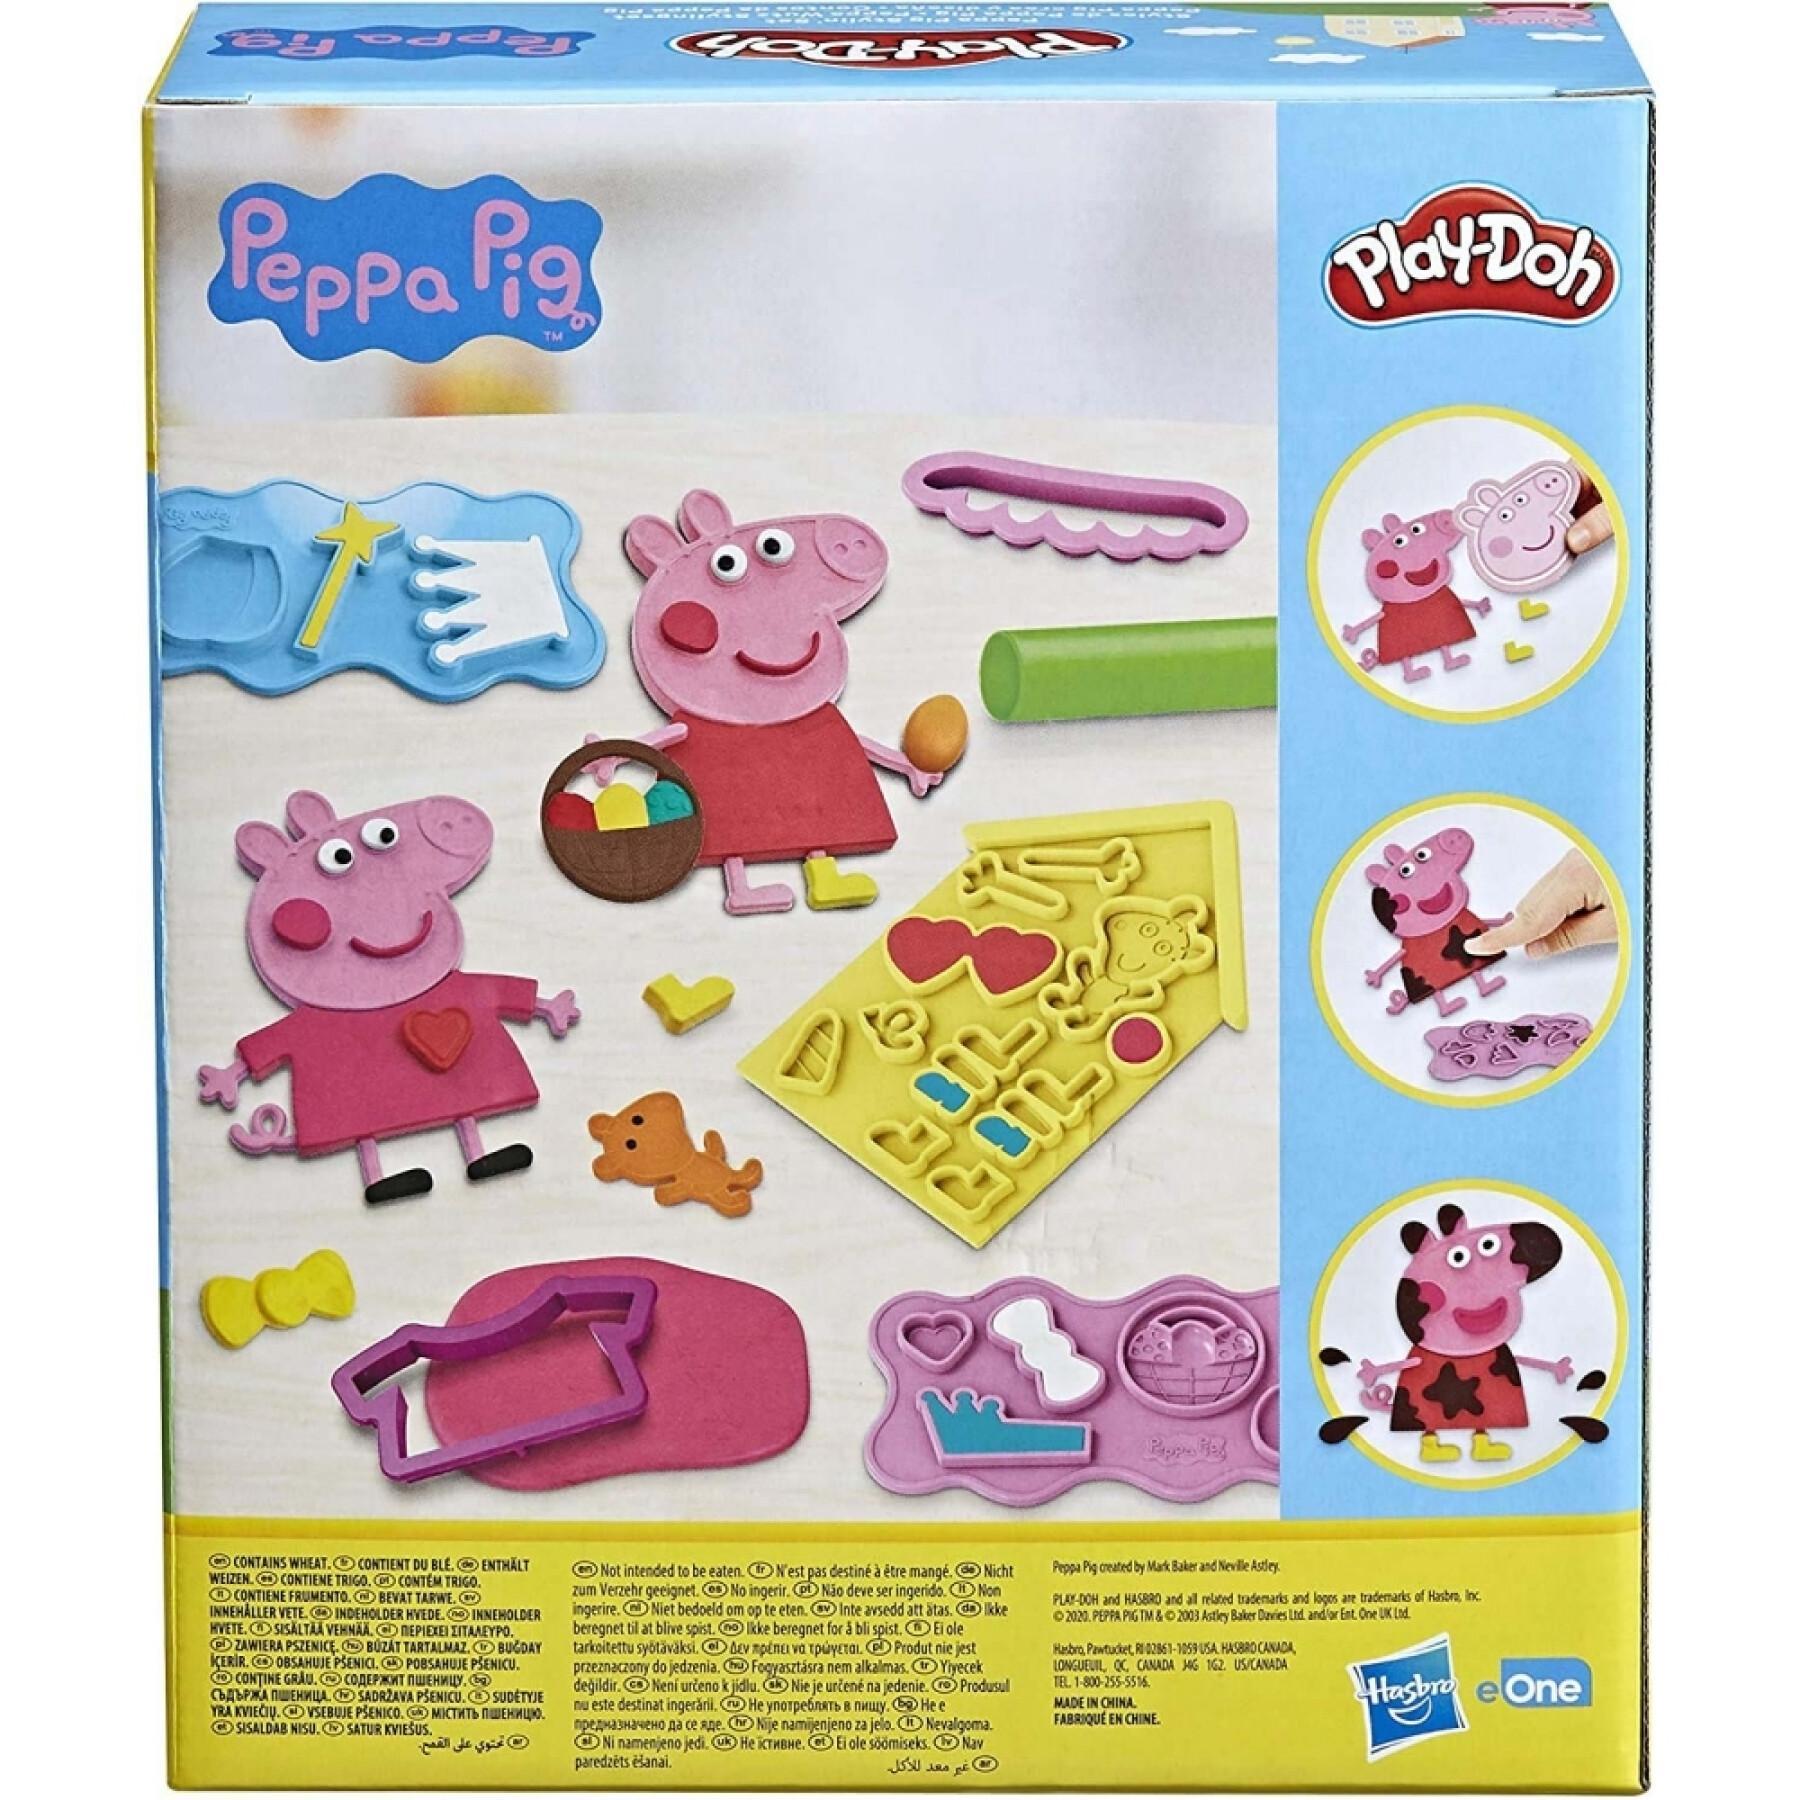 Modeling clay to create and design Peppa Pig